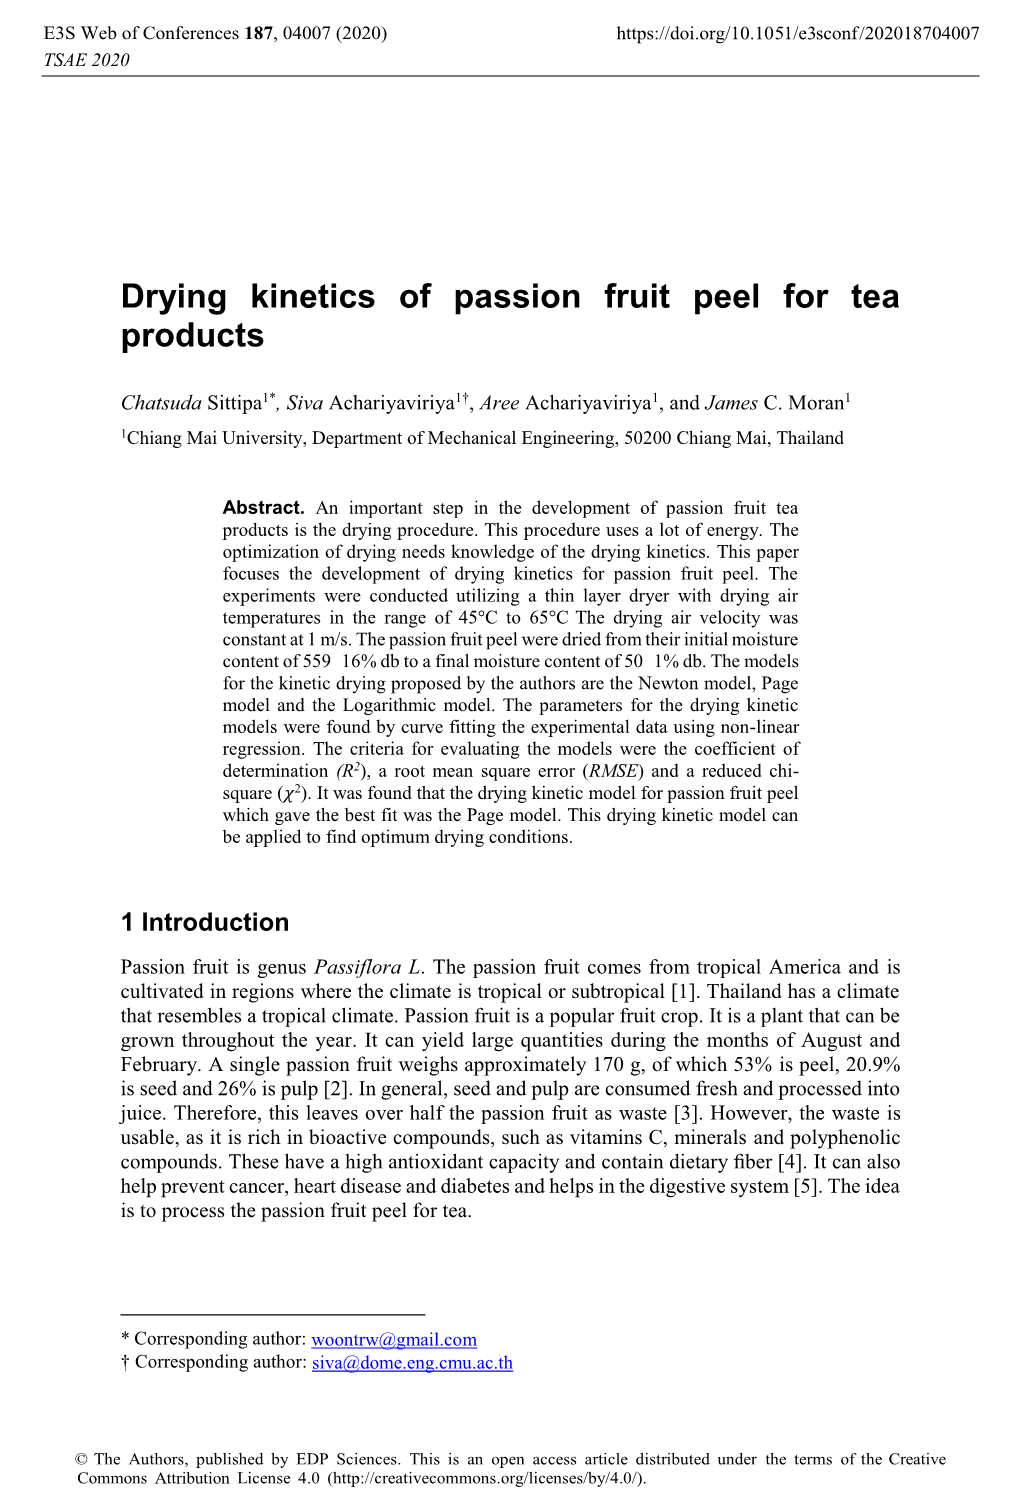 Drying Kinetics of Passion Fruit Peel for Tea Products